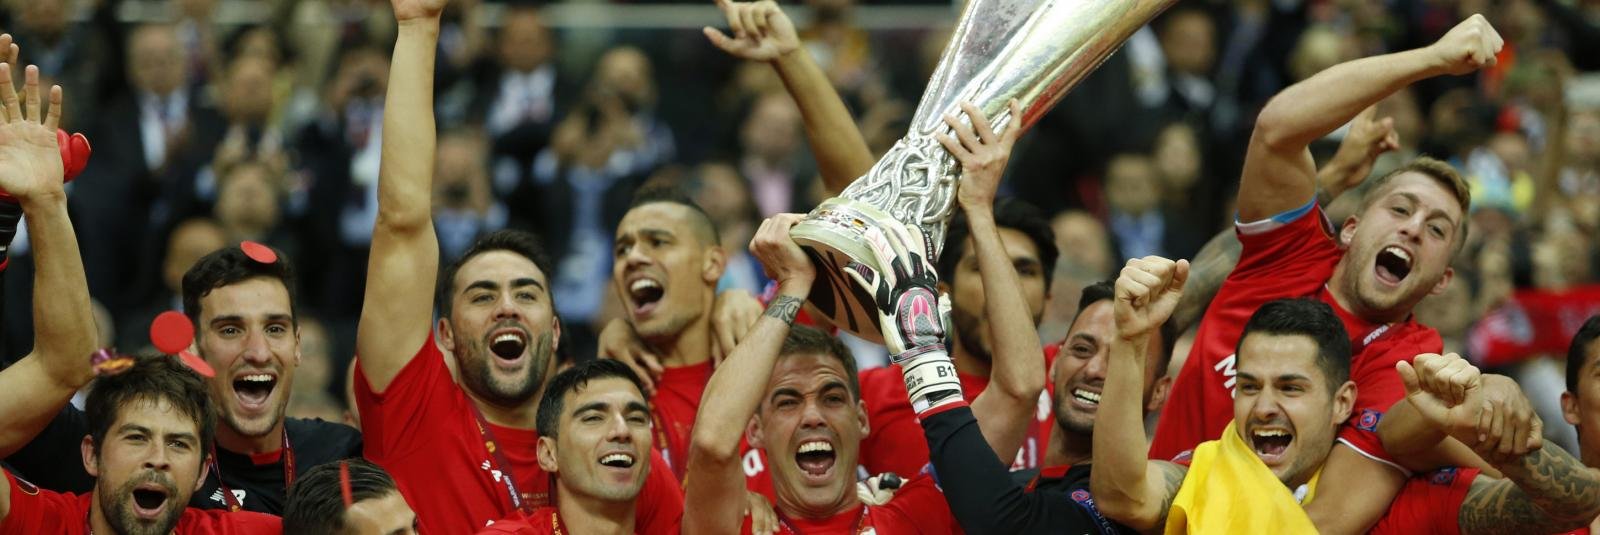 UEFA Europa League Draw: Premier League rivals Liverpool and Manchester United go head-to-head